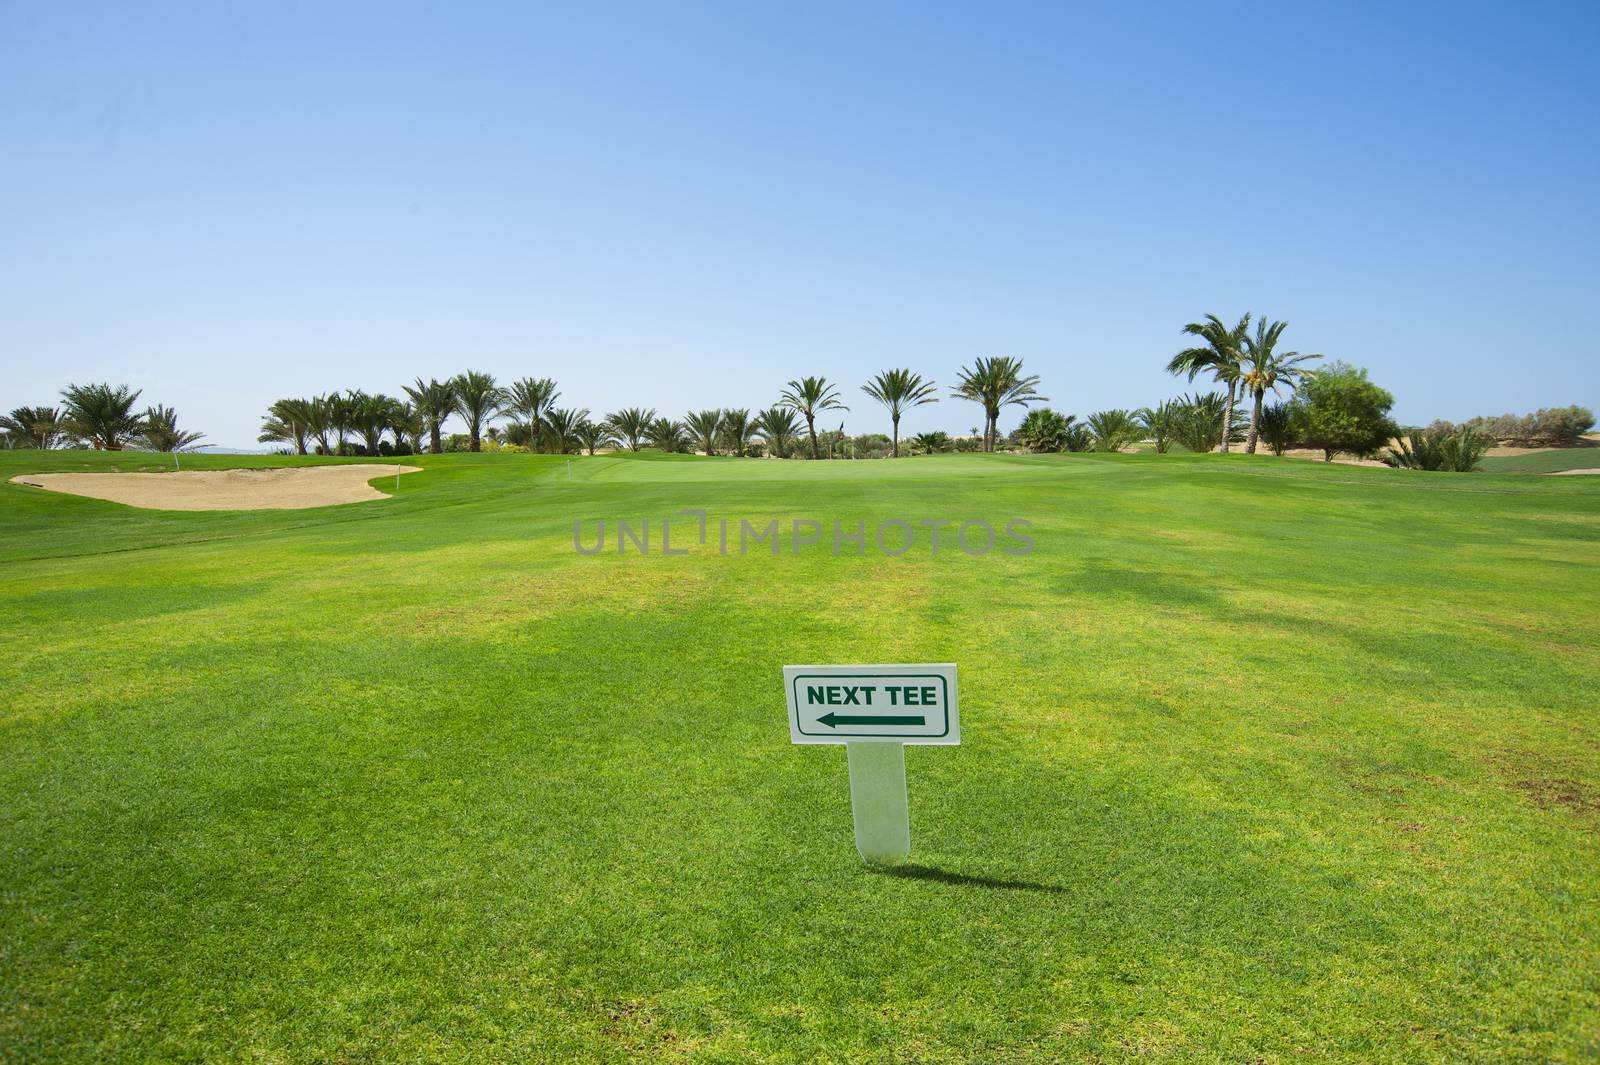 Sign on the fairway of a golf course indicating way to next hole